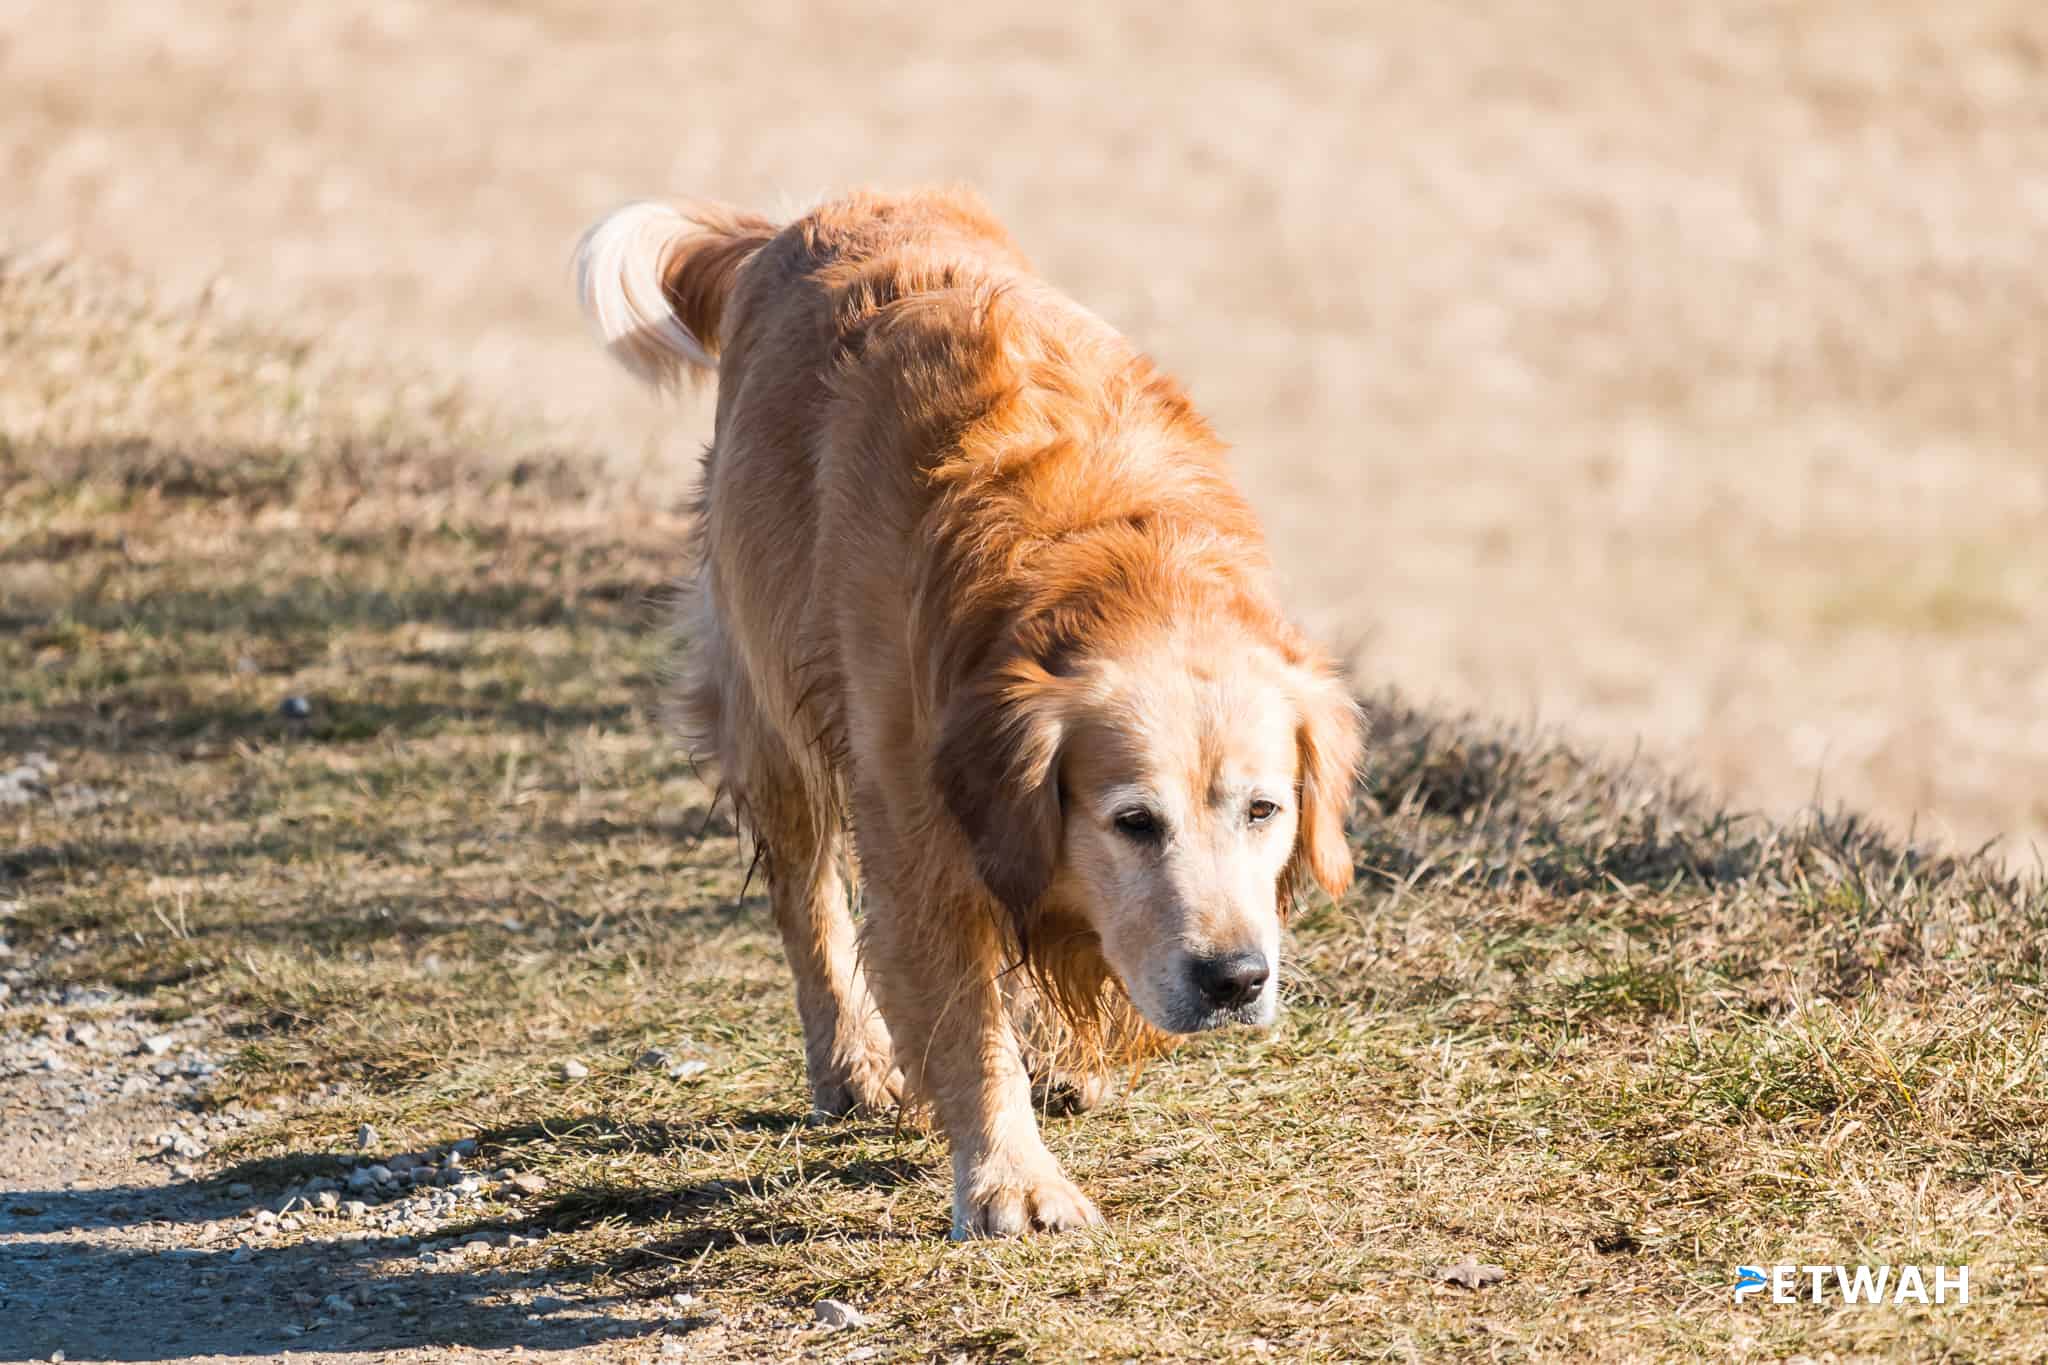 Ensuring Your Golden Retriever's Comfort and Happiness While Home Alone